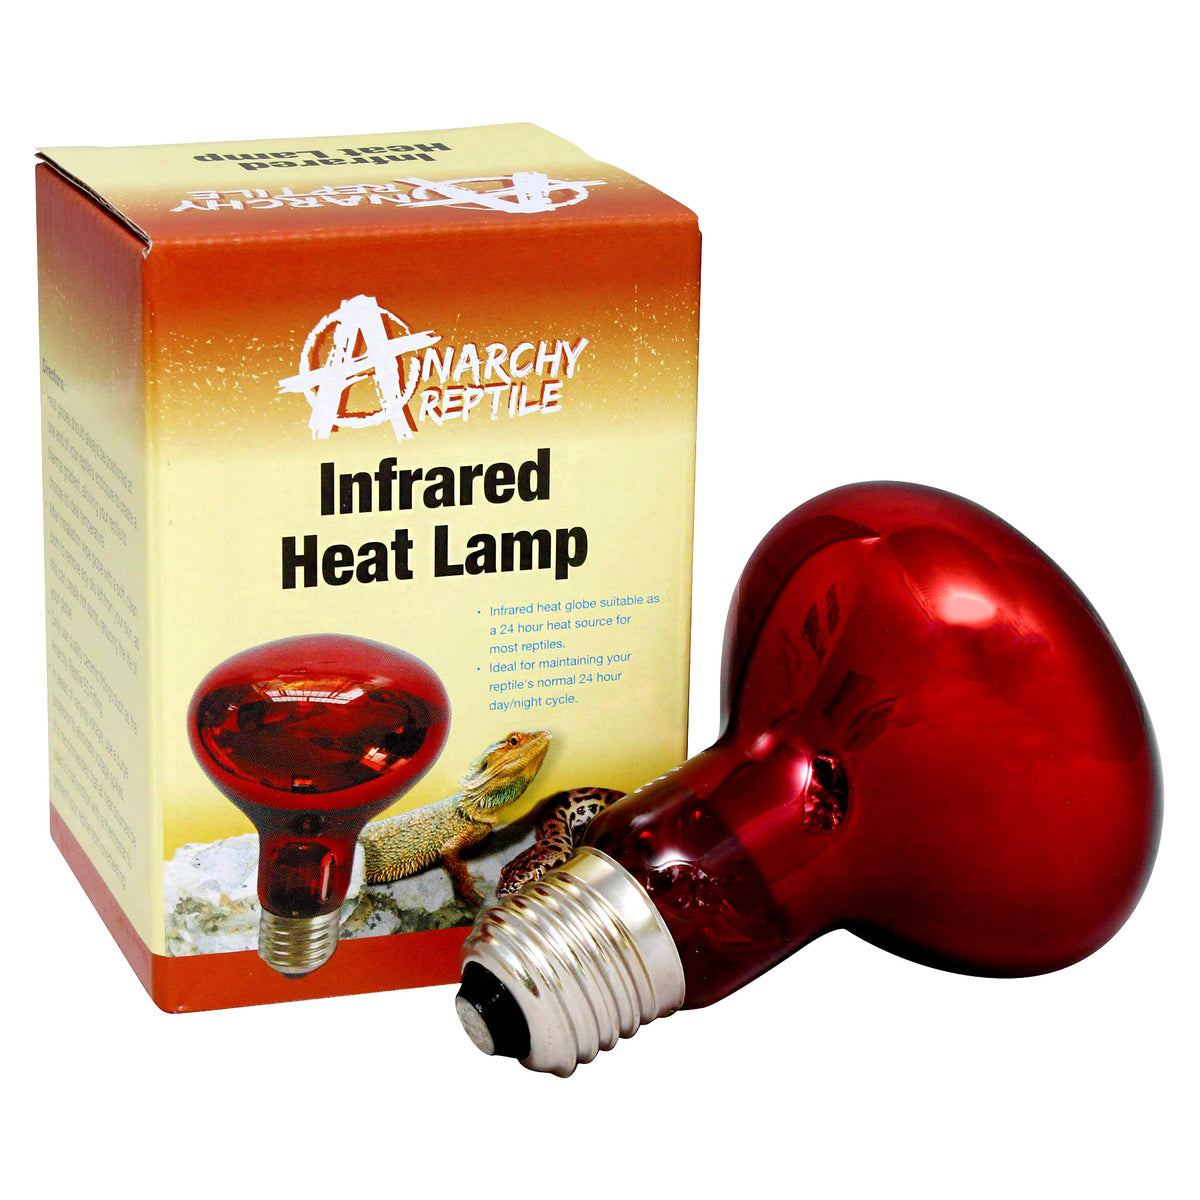 Anarchy Reptile Infrared Heat Lamp